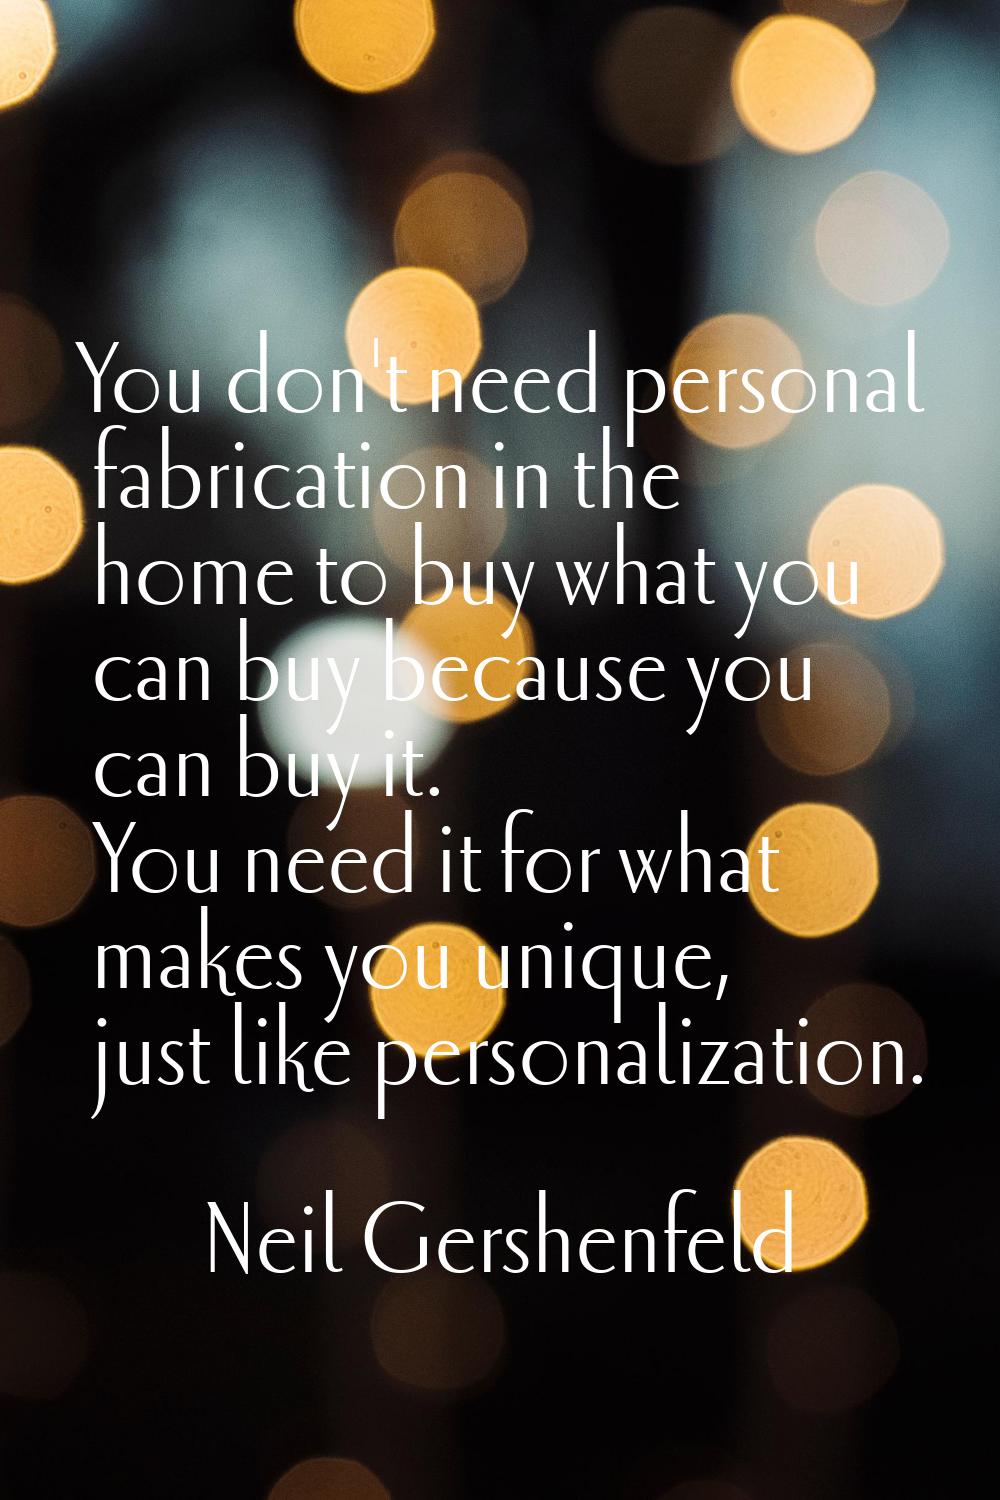 You don't need personal fabrication in the home to buy what you can buy because you can buy it. You